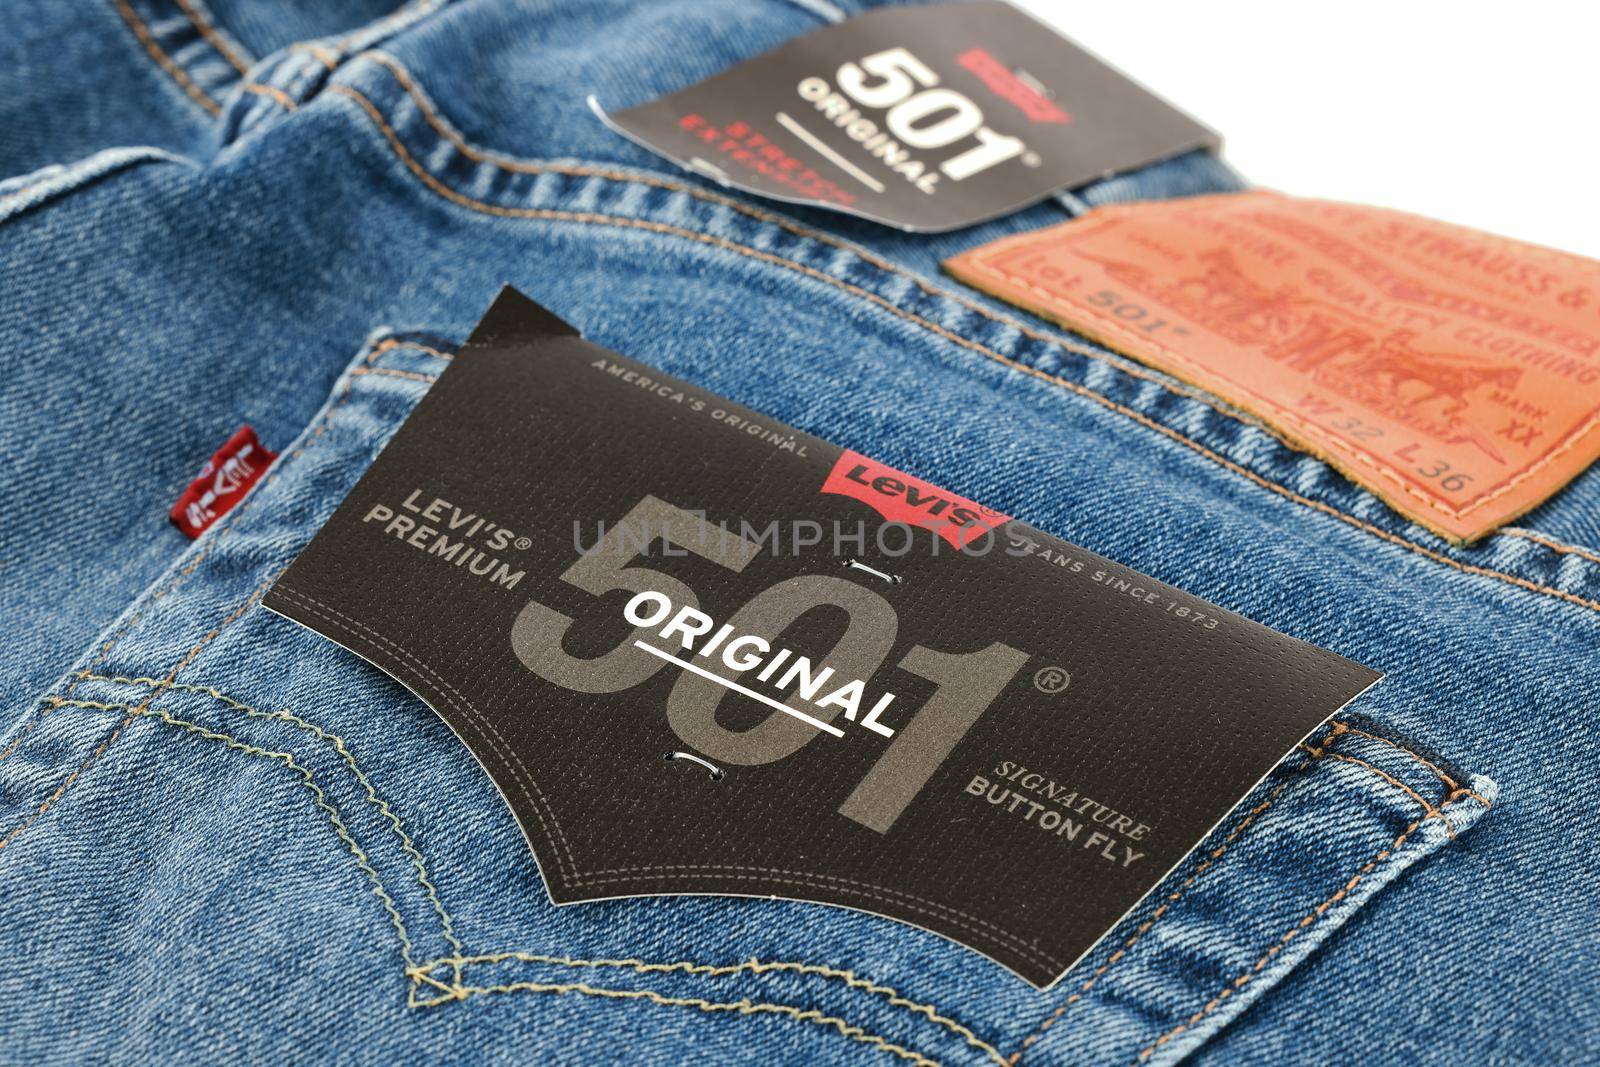 Levi's logo and badges is displayed on Levi Strauss 501 jeans. New LEVI'S 501 Jeans. Classic jeans model. 31.12.2021, Rostov, Russia.